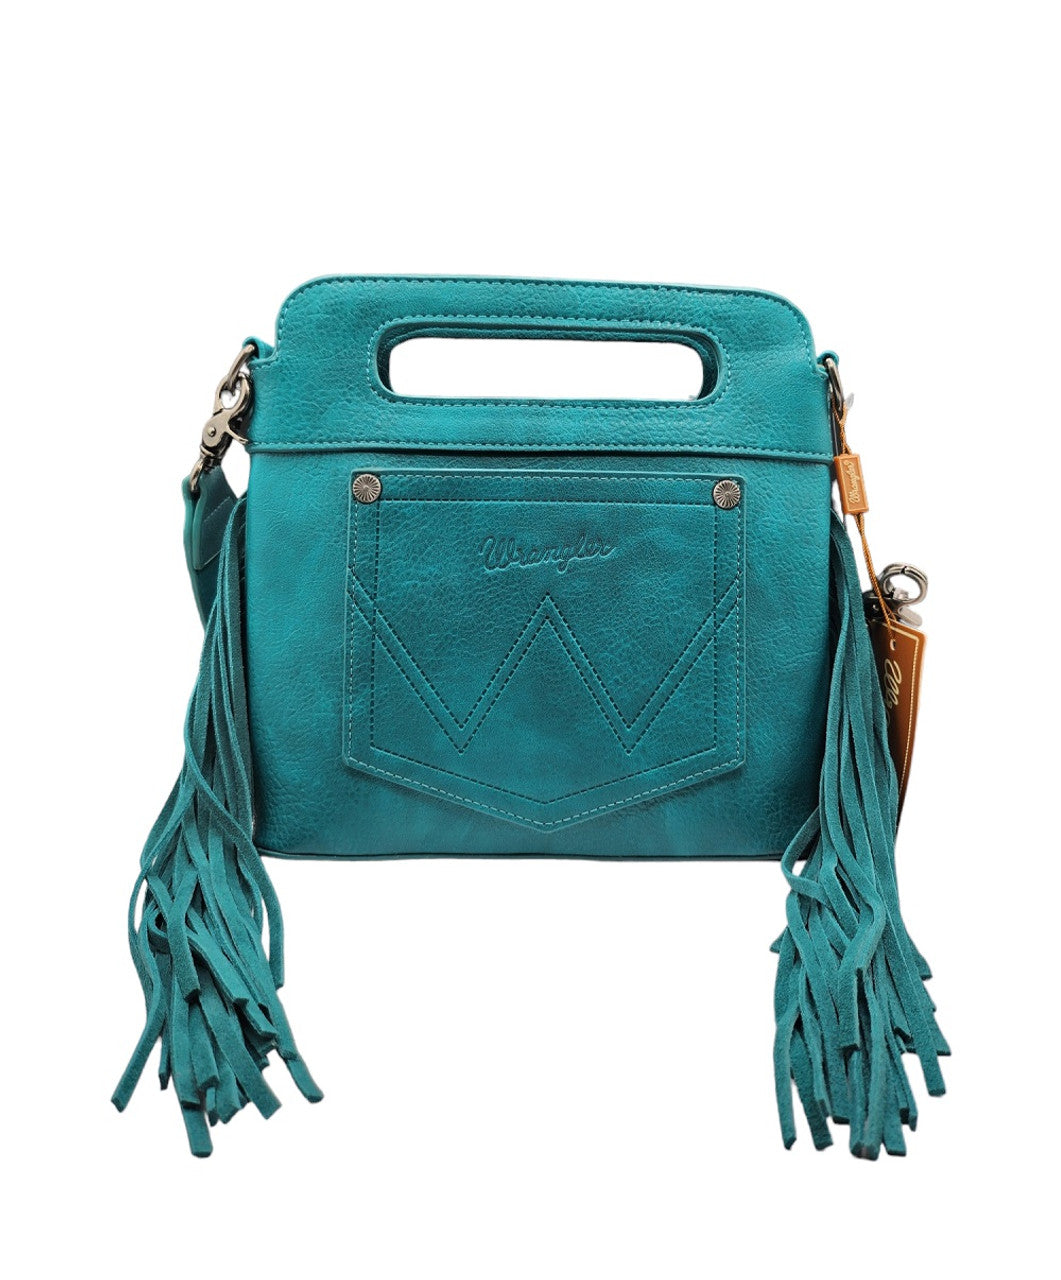 Wrangler Boot Stitched Crossbody Purse in Turquoise